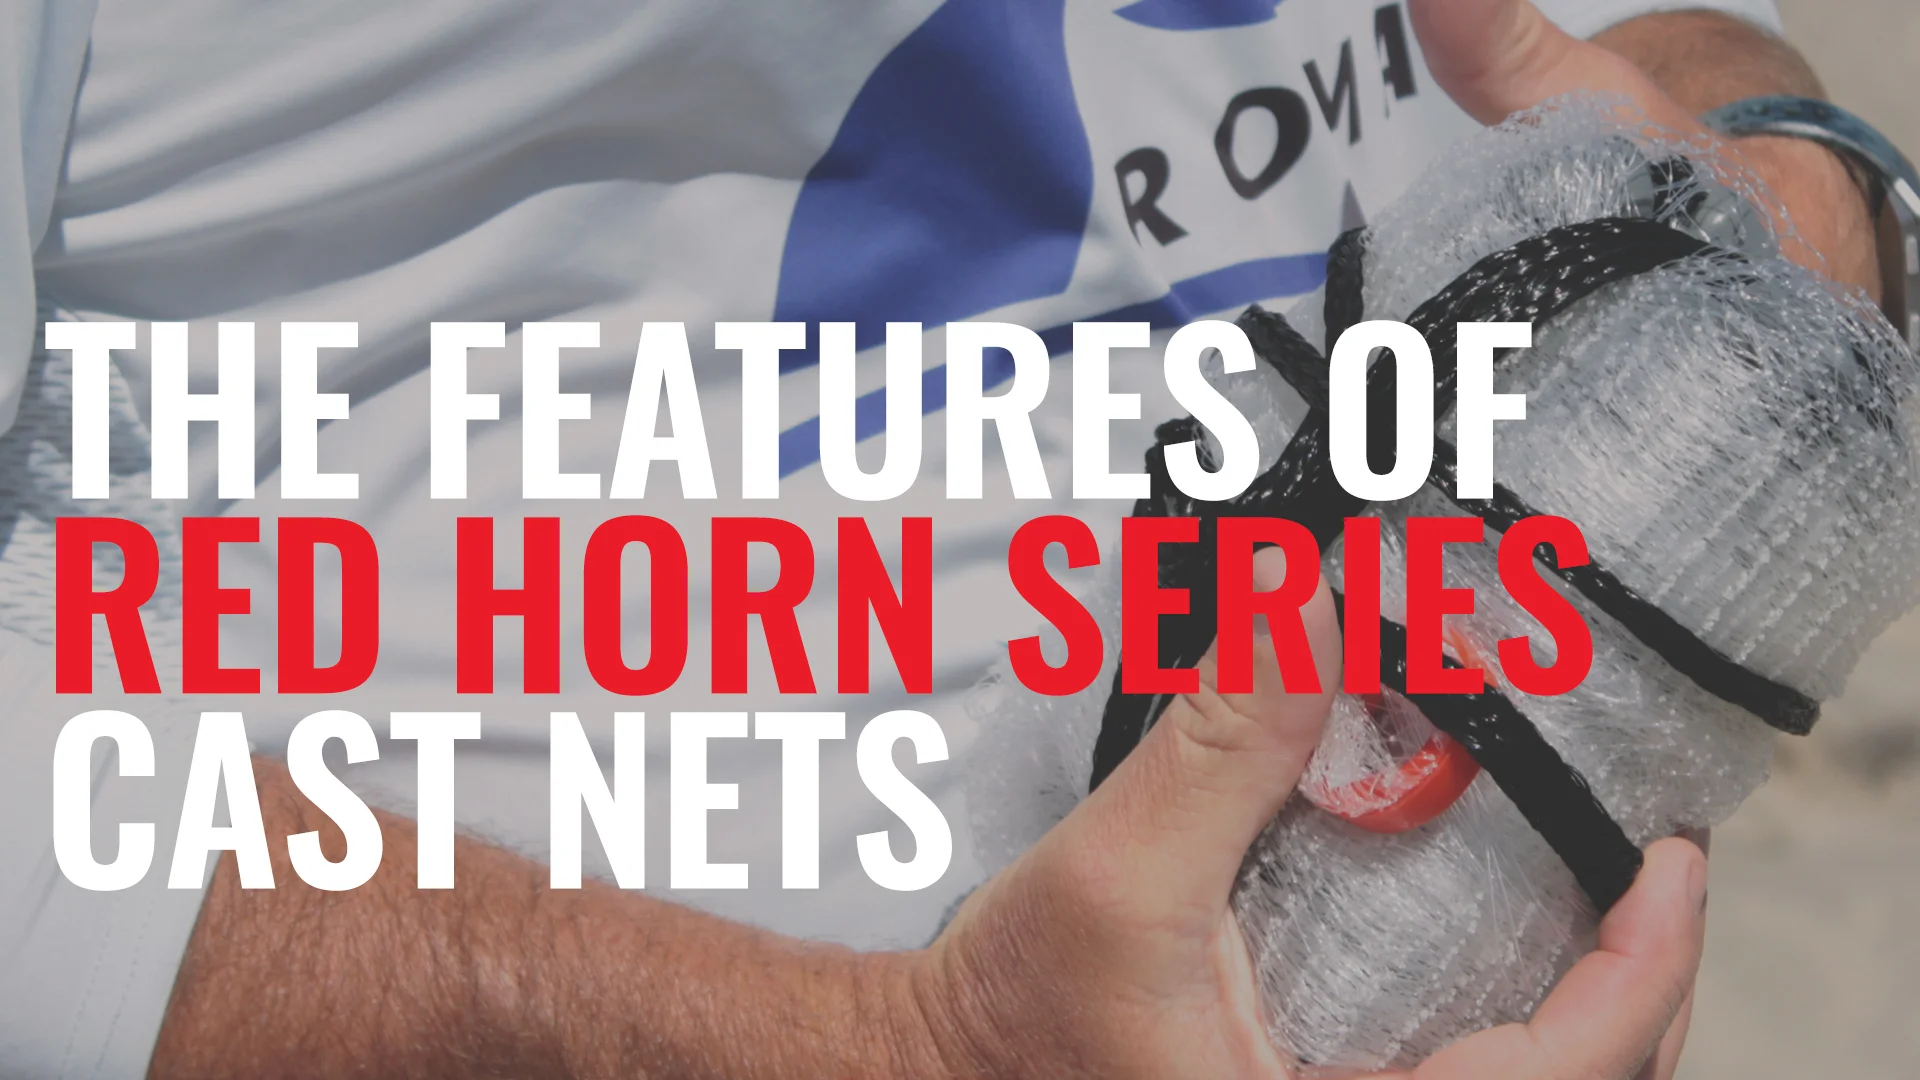 Ahi USA Red Horn Series Cast Net Features on Vimeo